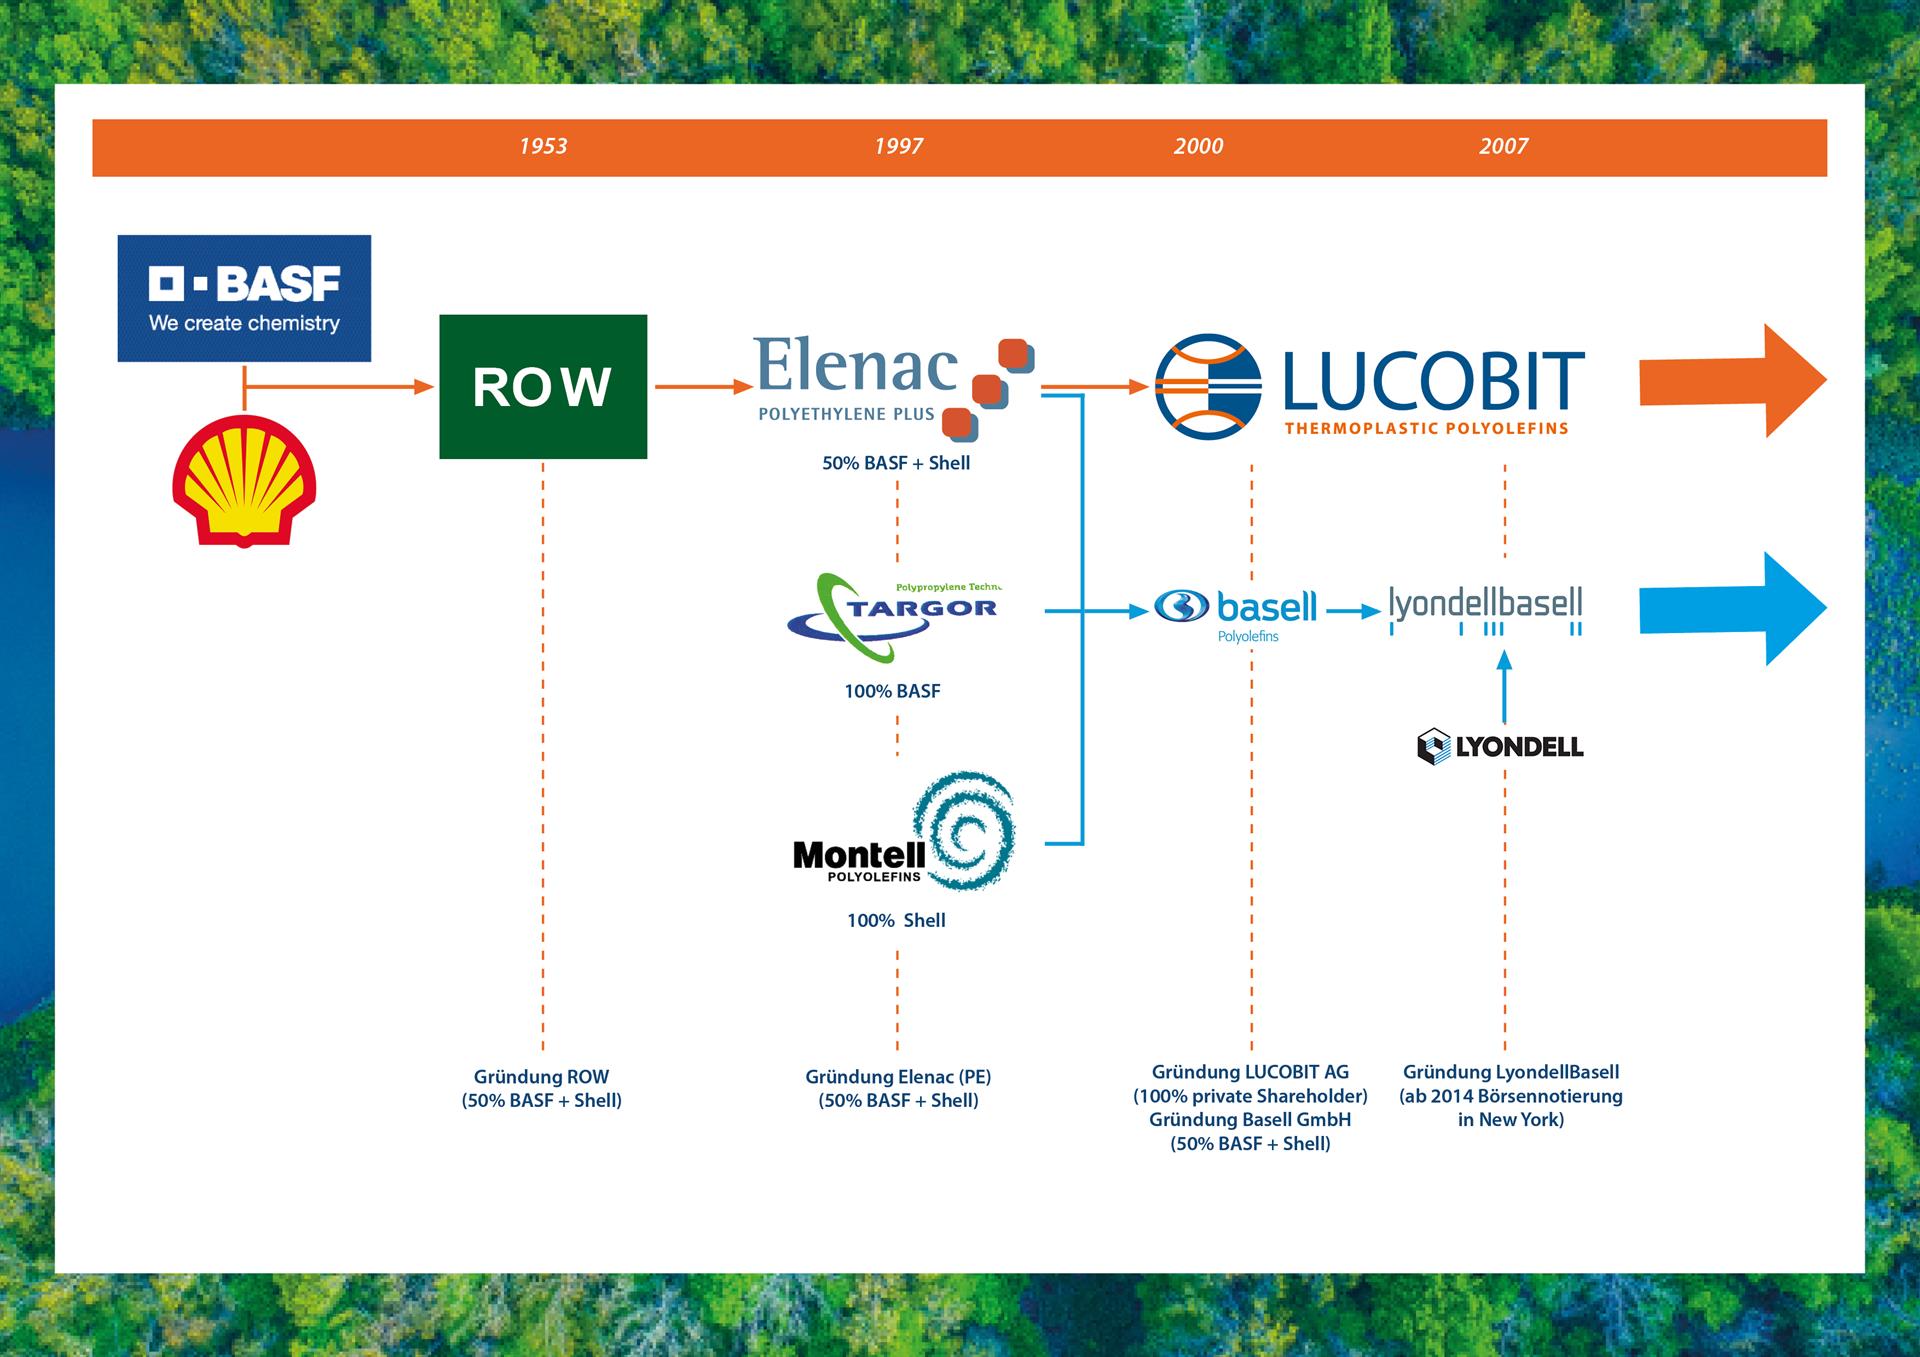 History of the LUCOBIT company